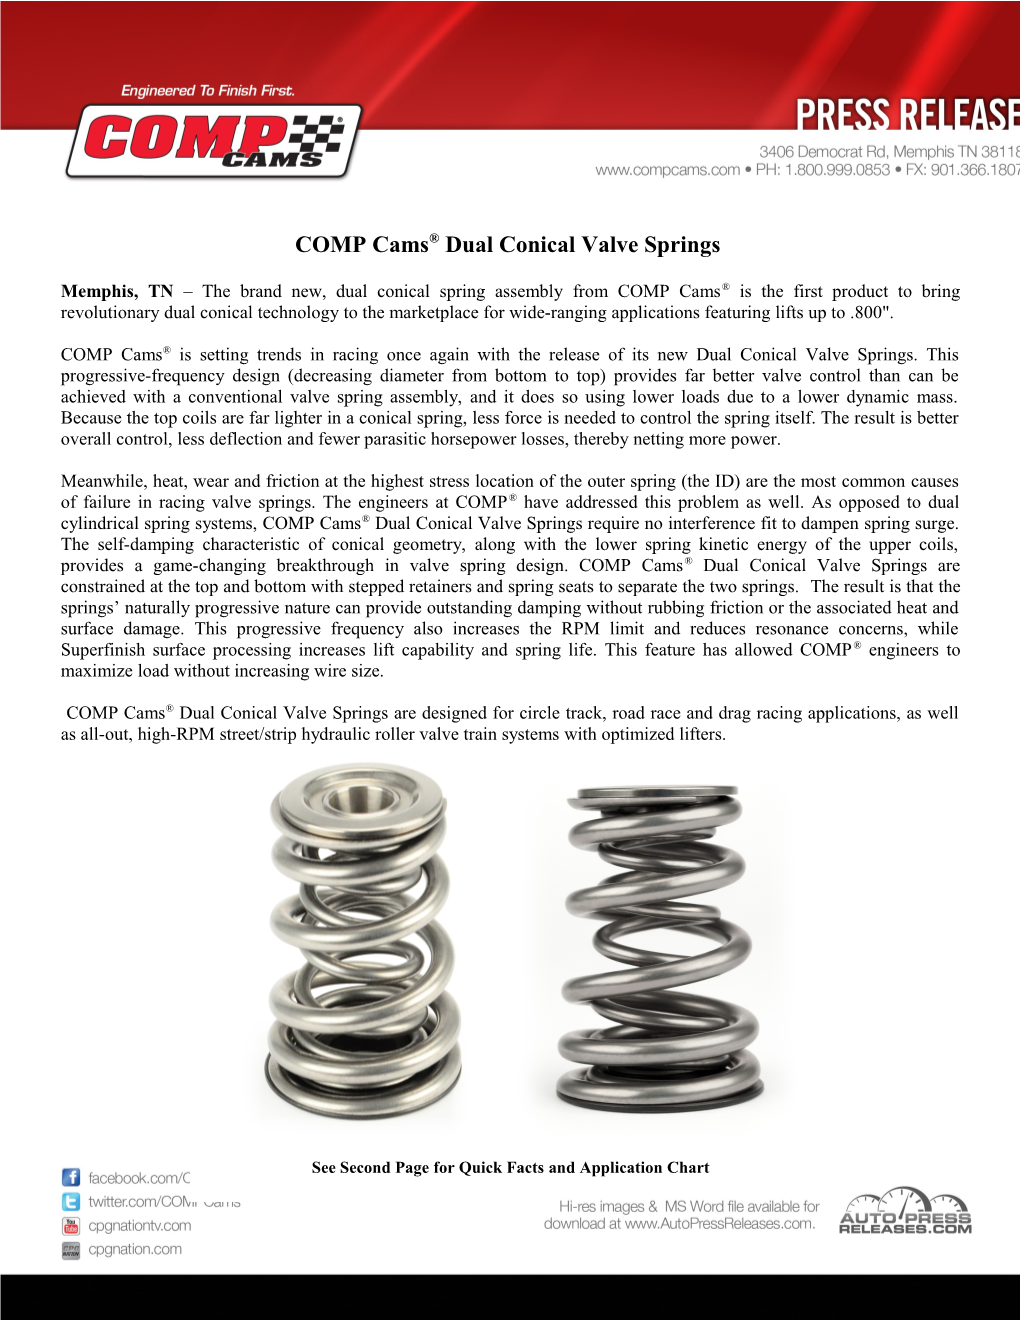 COMP Cams Dual Conical Valve Springs